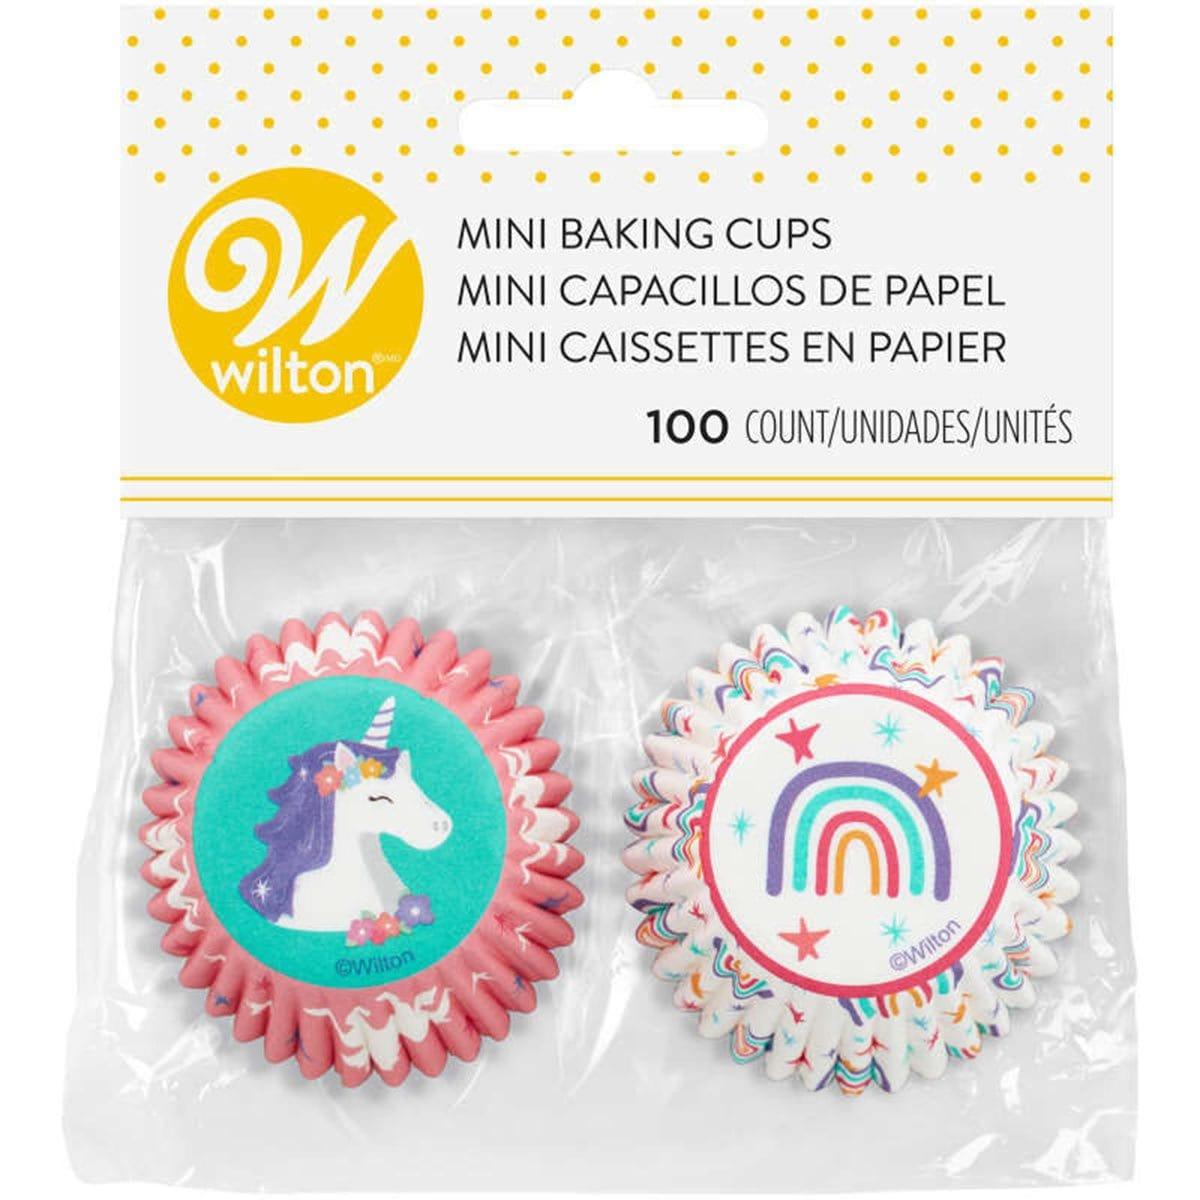 Buy Cake Supplies Unicorn Mini Baking Cups, 100 Count sold at Party Expert